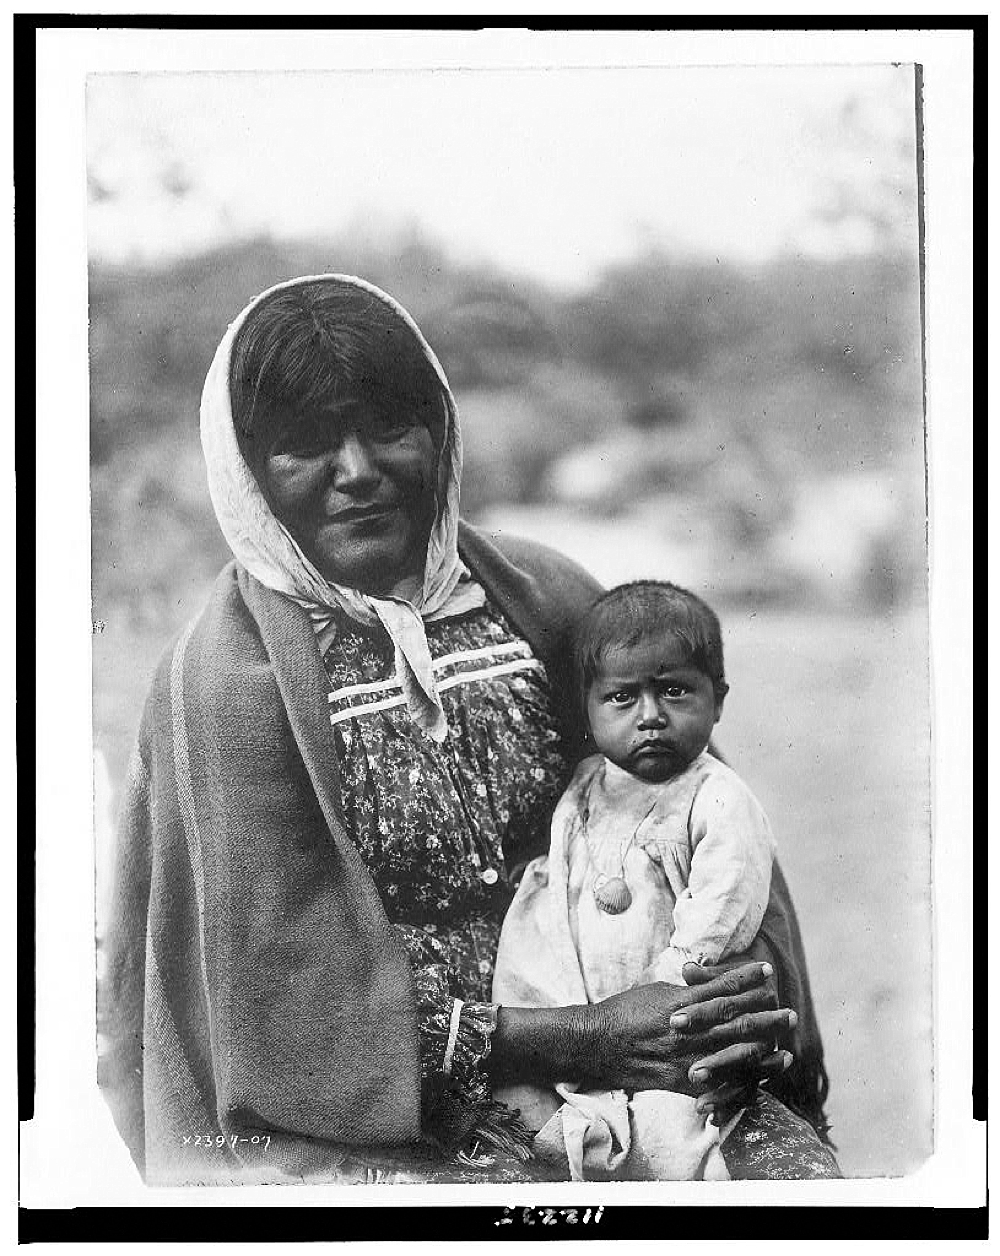 Chemehuevi mother and child